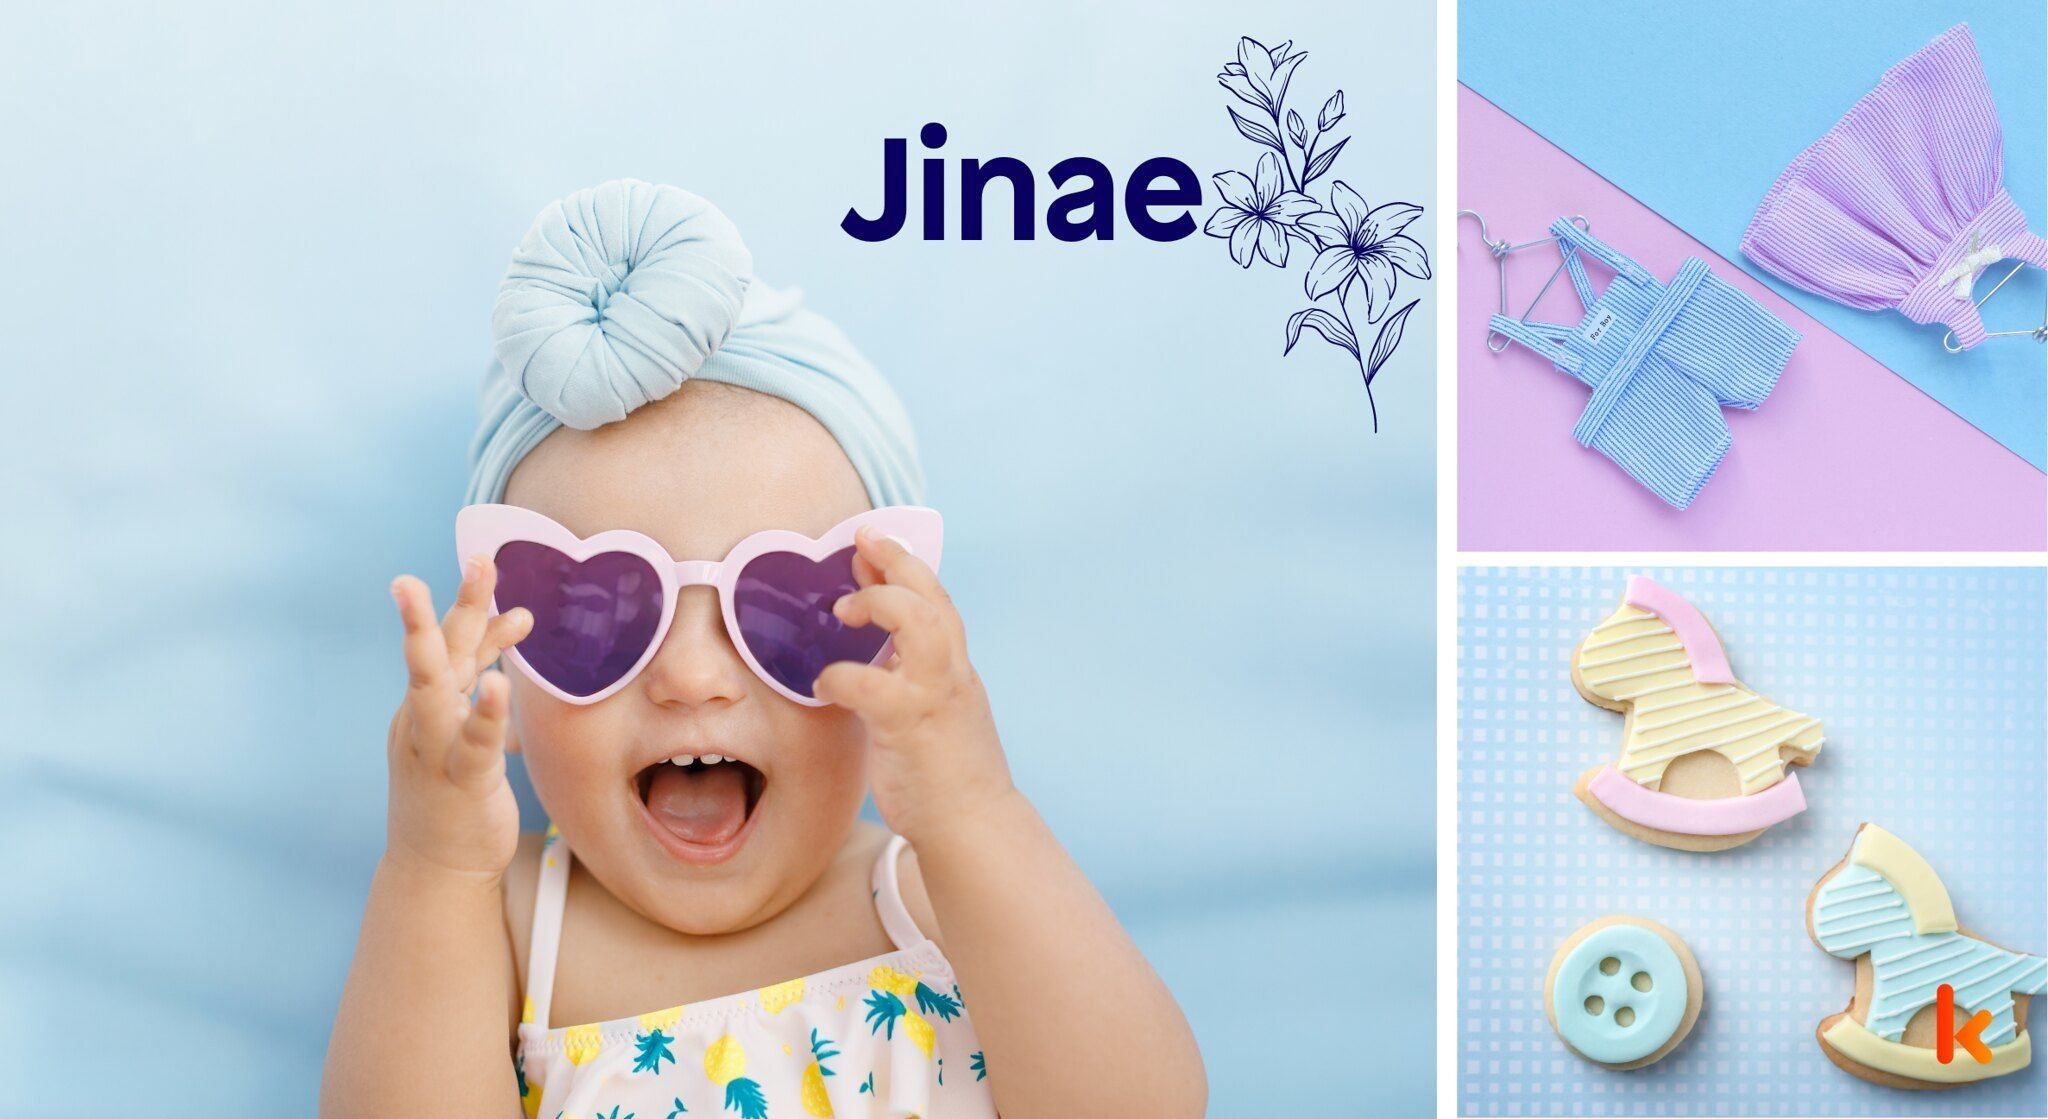 Meaning of the name Jinae